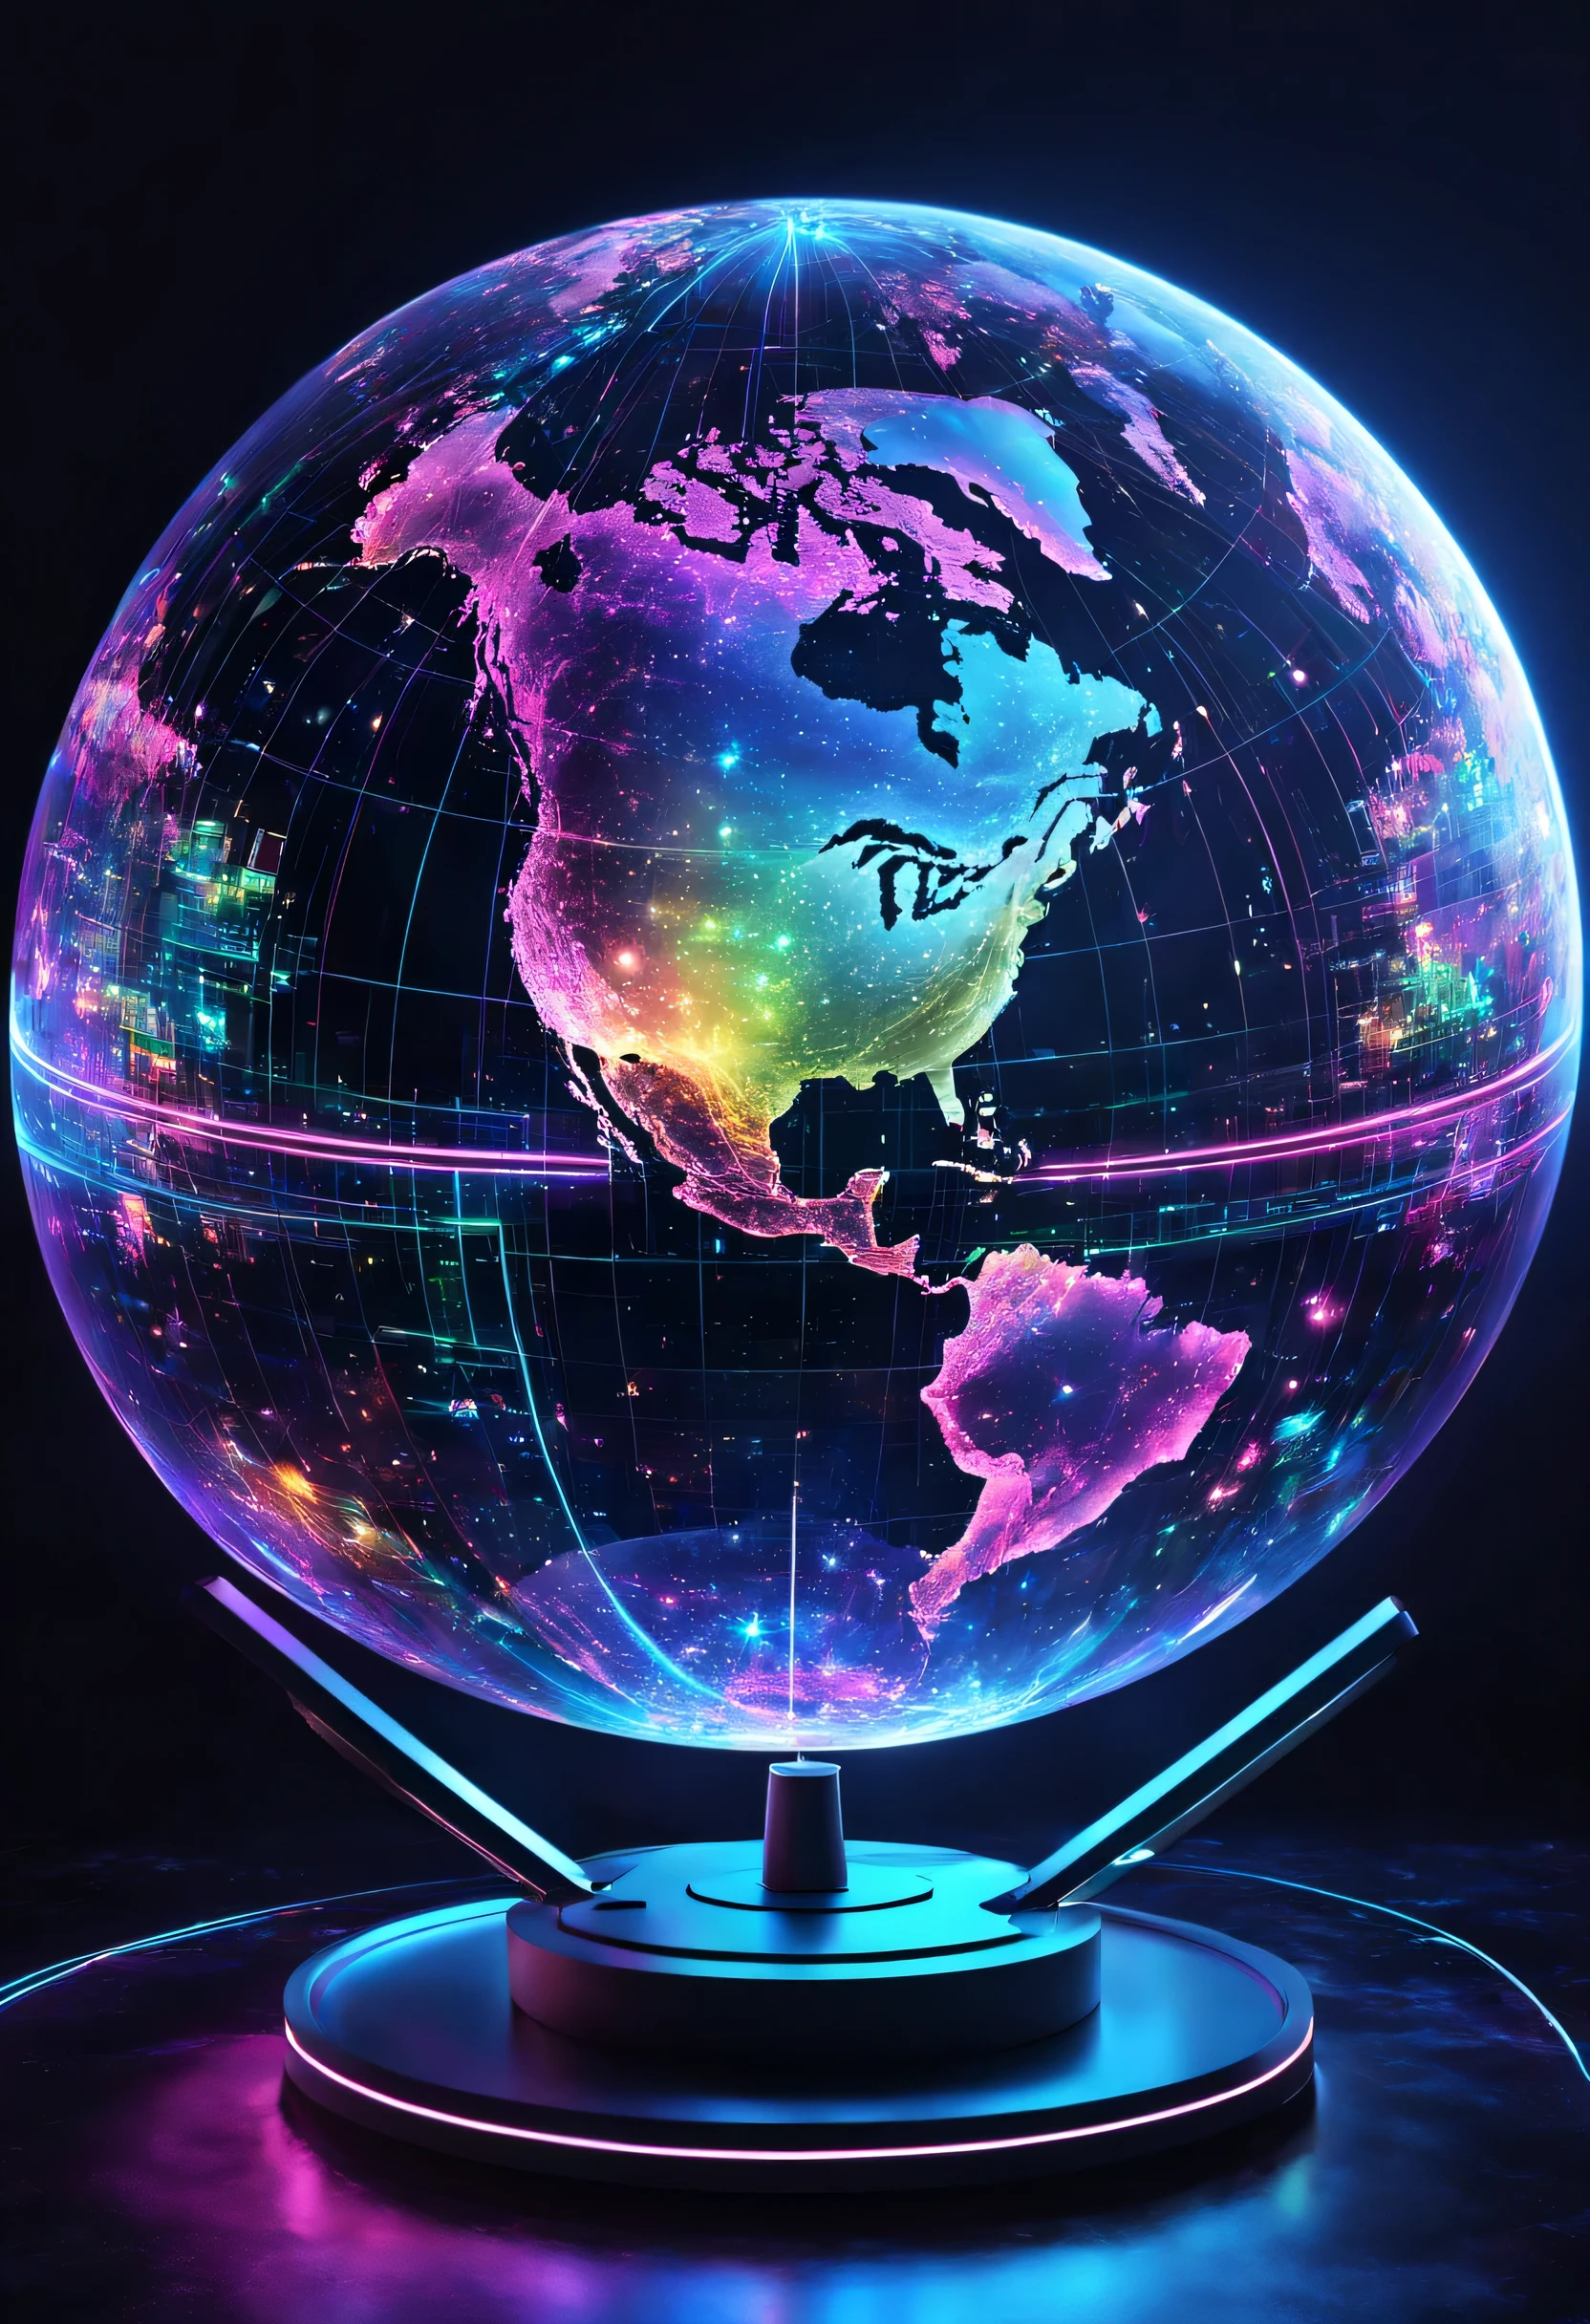 holography,draw in neon colors((Earth)):sphere:((floating)),transparent,Three-dimensional,light,SF,Digitalアート,Digital,scientific,dark background:electronic circuitry:draw in neon colors,3D,masterpiece,Digital空間,energy,beautiful,最高masterpiece,8K,科学のlight,be familiar with,Bright colors,colorful,nice,beautiful,rich colors,beautifullightのライン.magic effect,Sparkling,beautifullightの粒